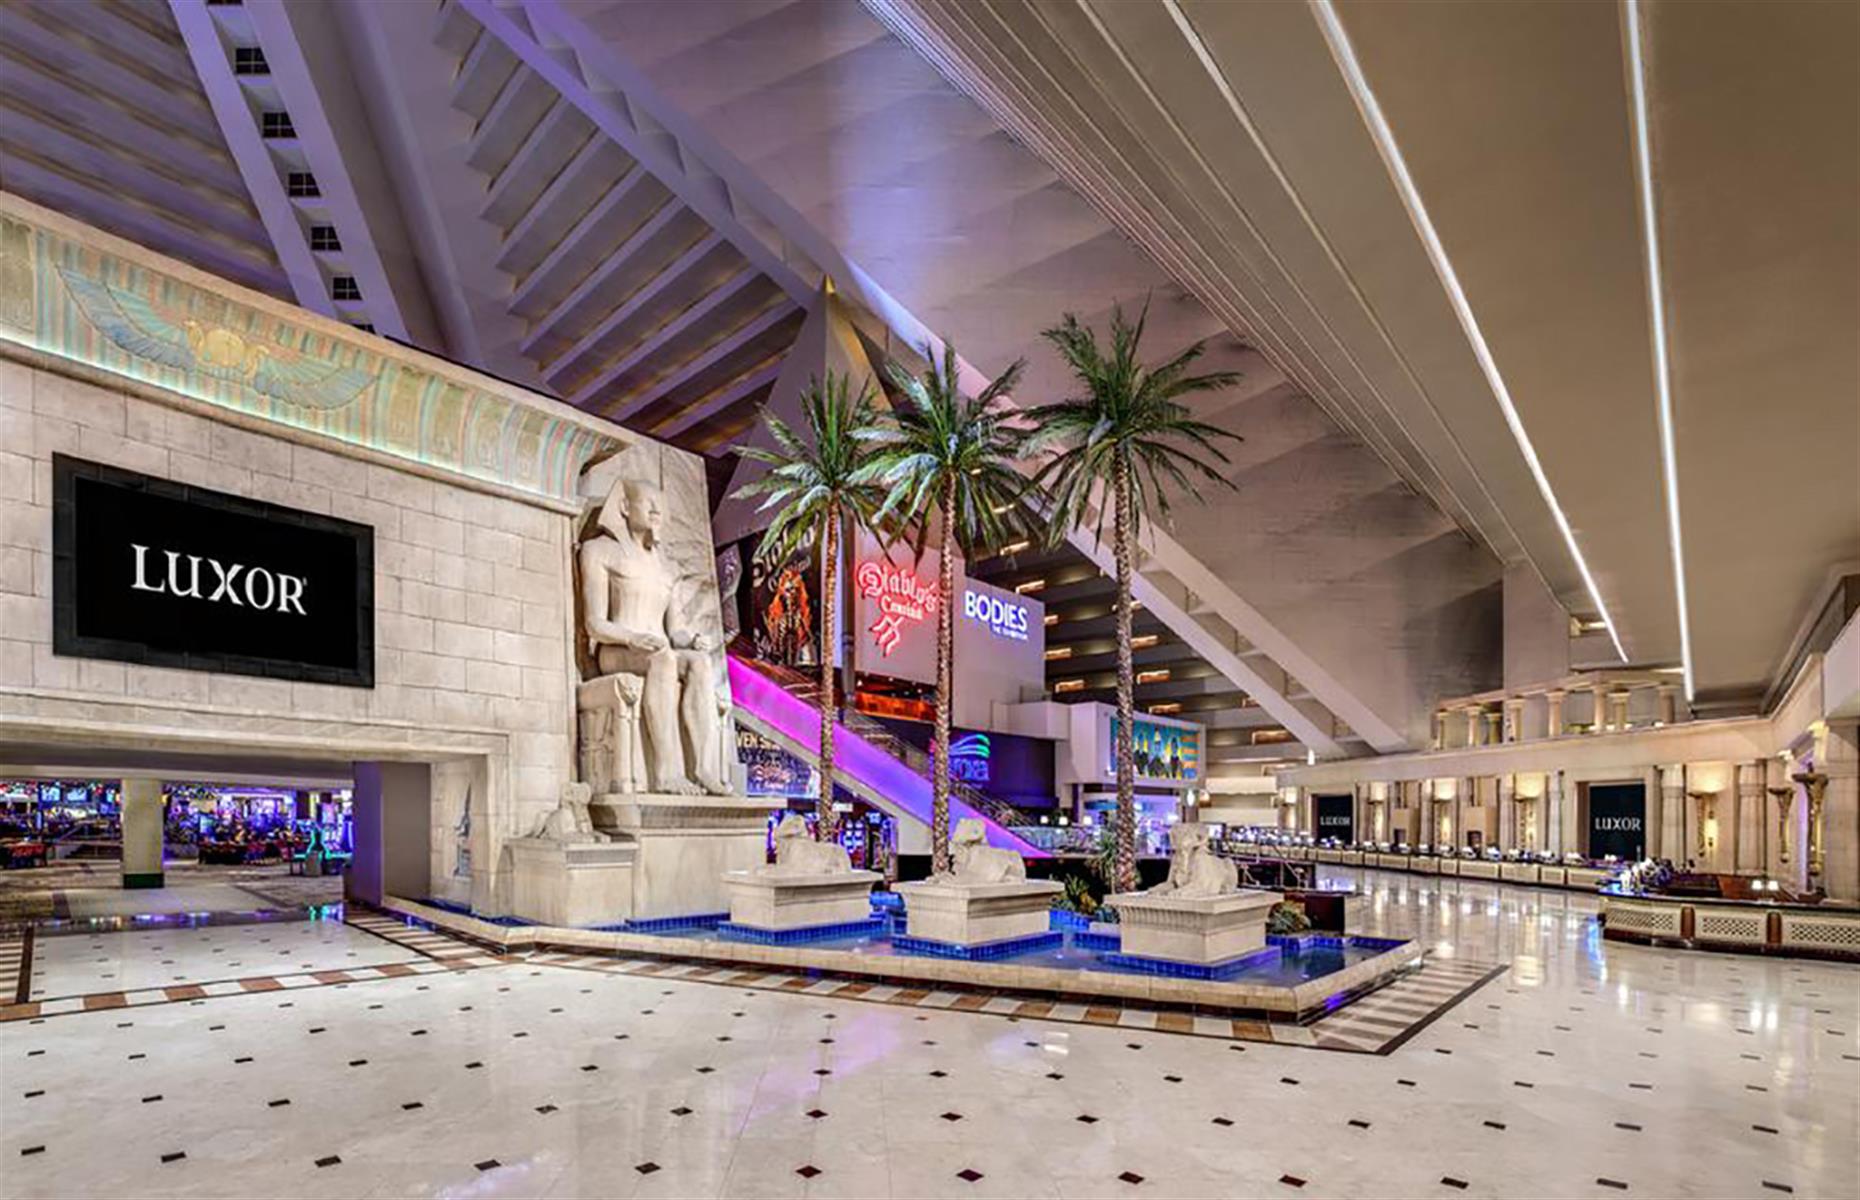 <p>Complete with its very own sphinx, obelisk and statues of pharaohs, <a href="https://www.booking.com/hotel/us/luxor.en-gb.html" rel="nofollow” target=">Luxor</a> in Las Vegas is like stepping right into Ancient Egypt. You'll find the rooms all around the perimeter of an imposing 30-story pyramid while the hotel's casino is housed in a giant temple within the pyramid. It's perfect for any budding Egyptologist.</p>